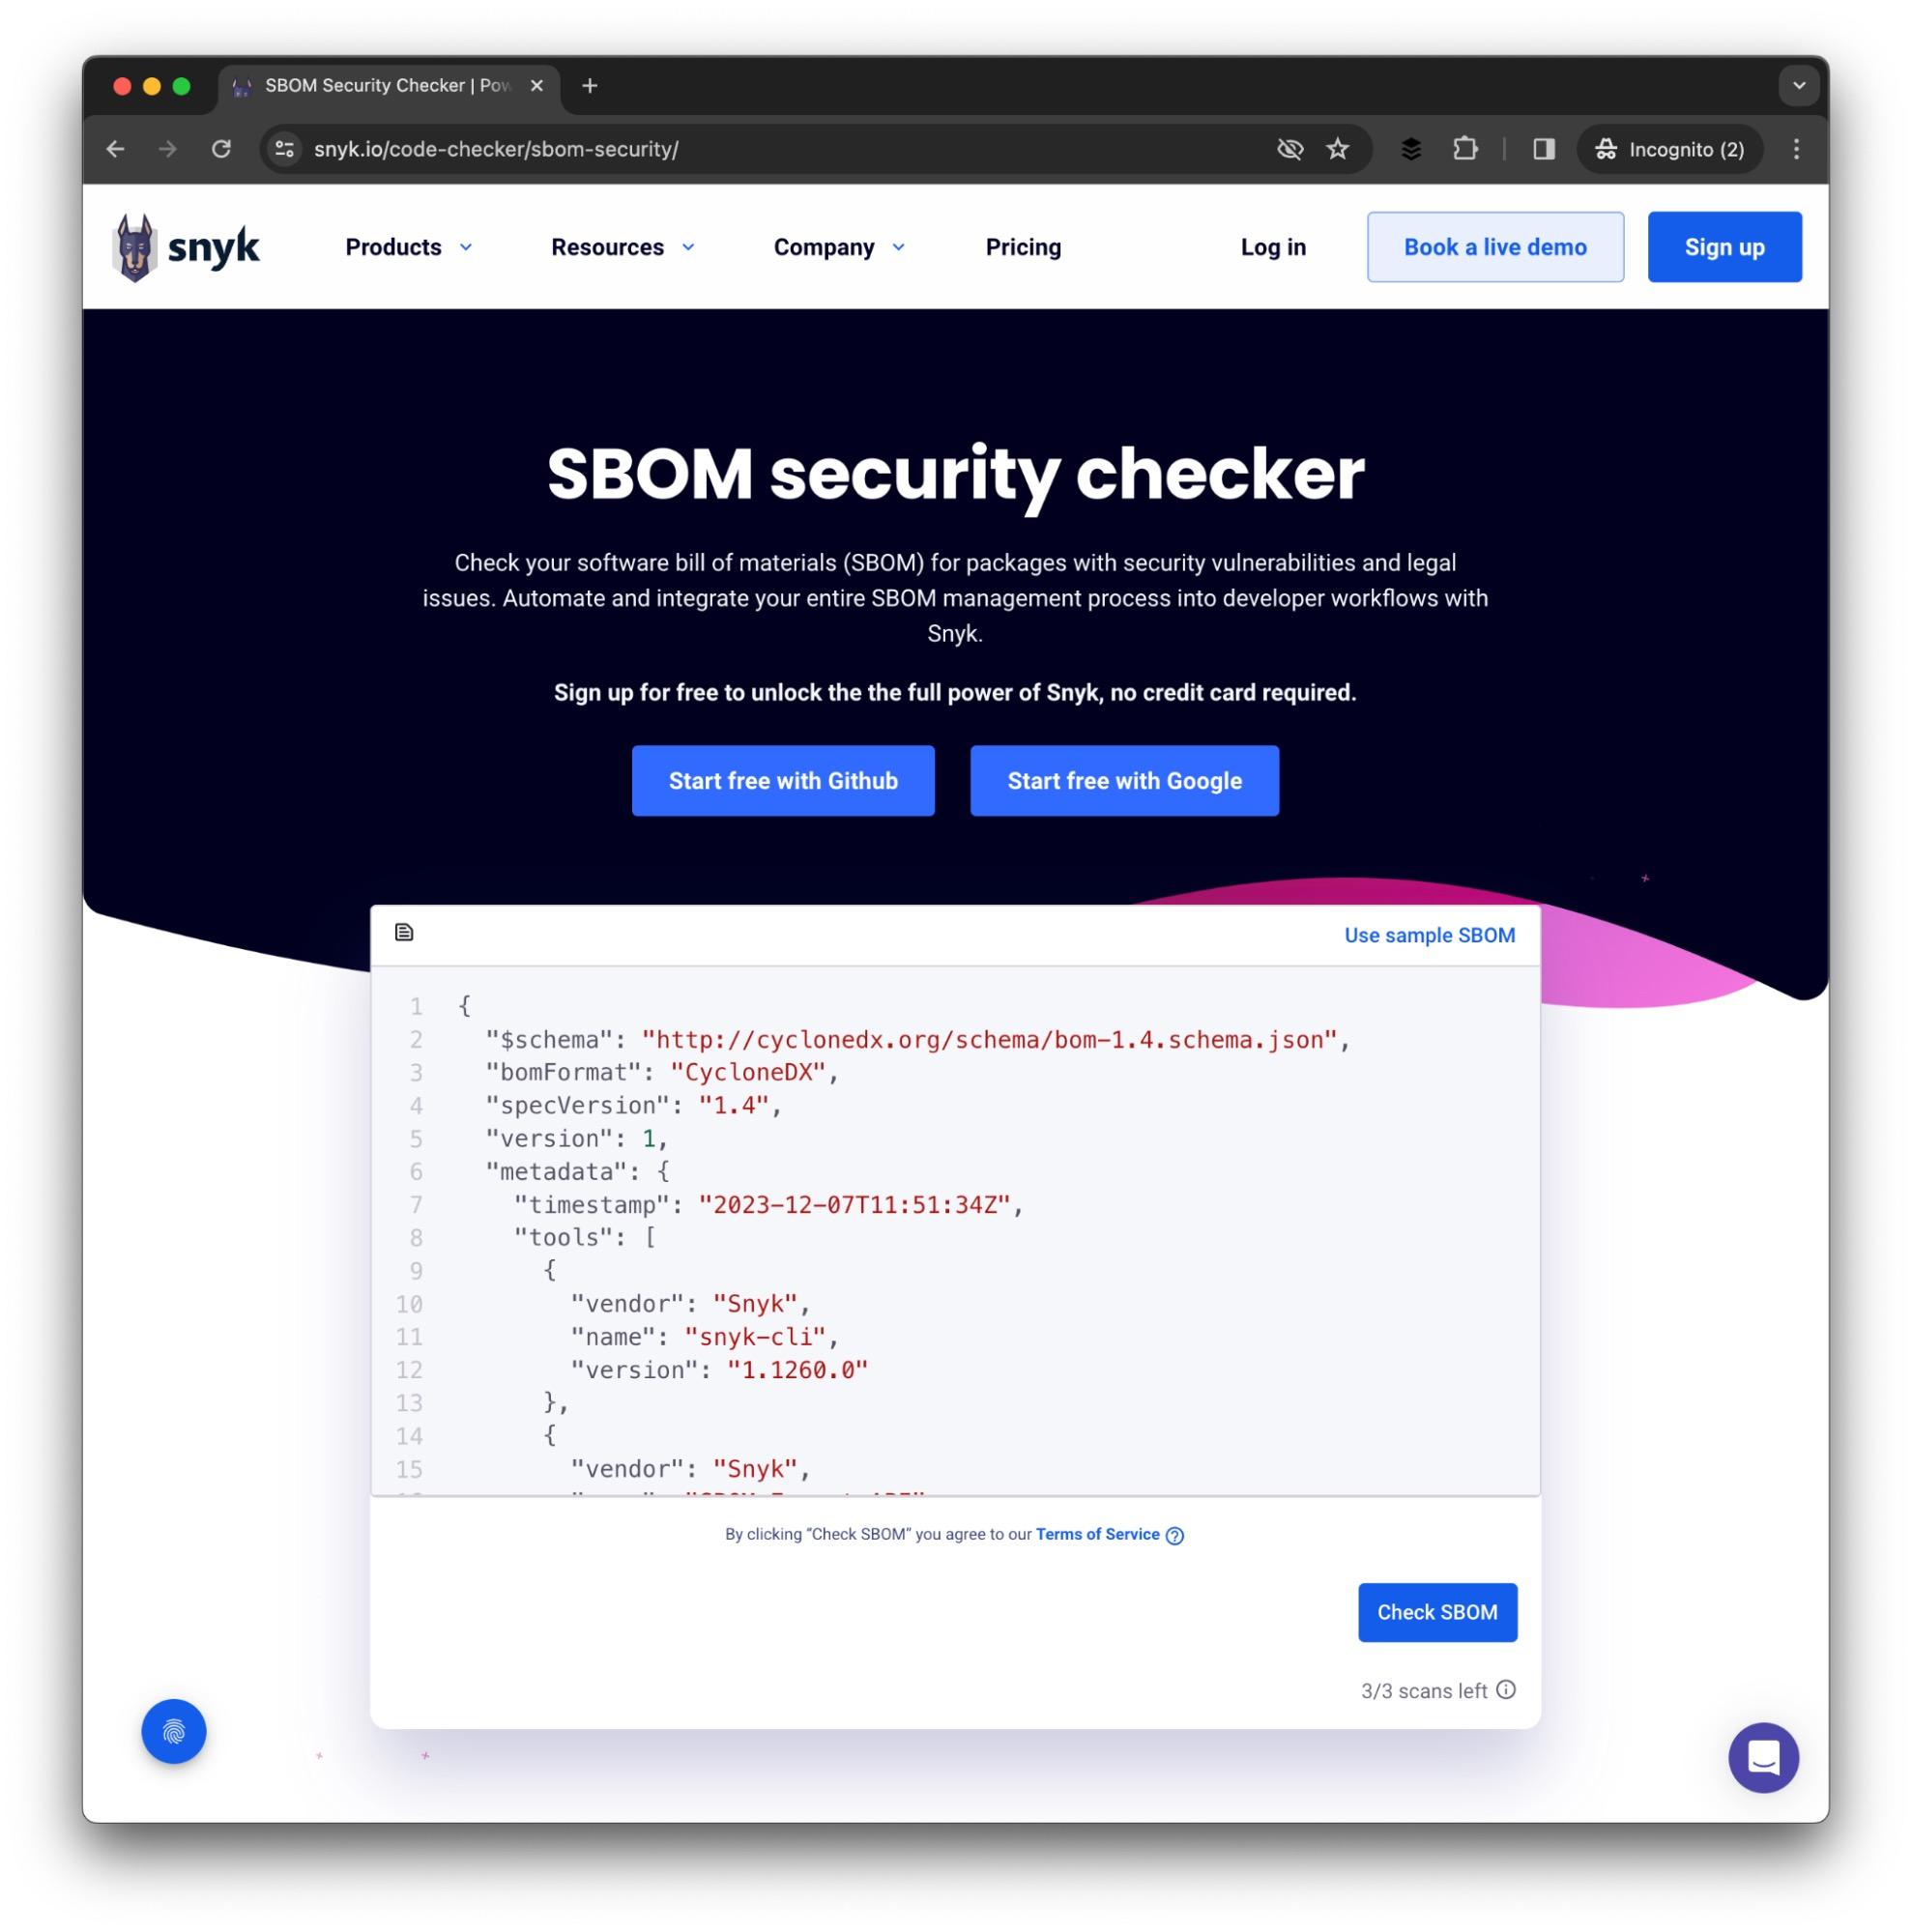 SBOM Security checker by Snyk to scan your software bill of material for packages with security vulnerabilities.